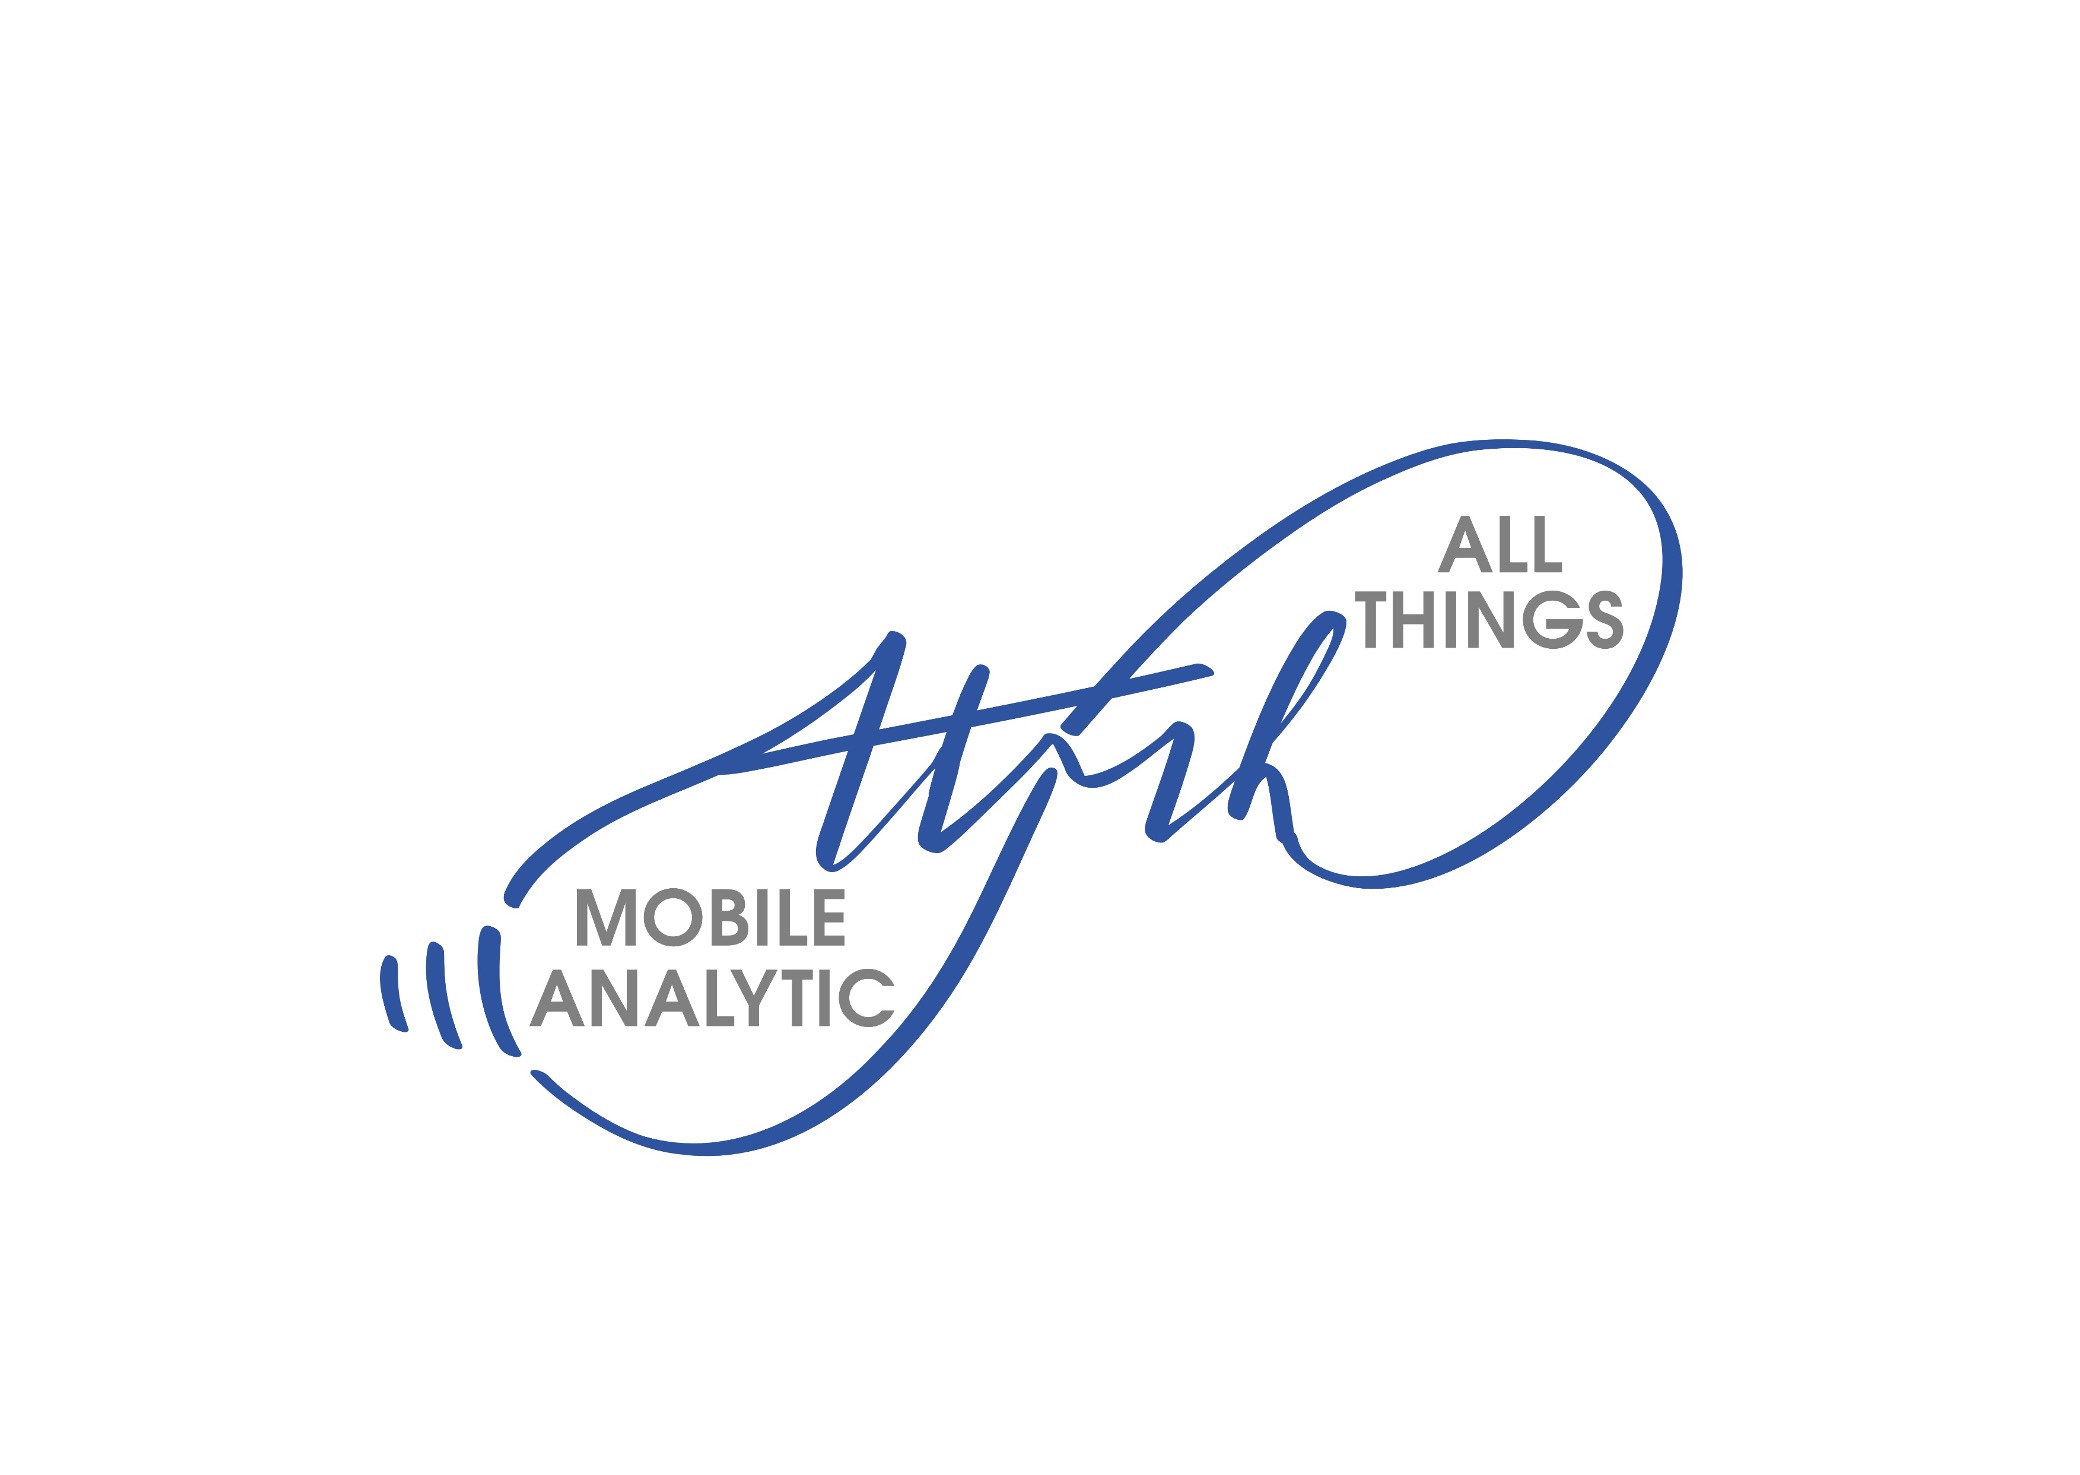 All Things Mobile Analytic Inc., Thursday, August 25, 2022, Press release picture